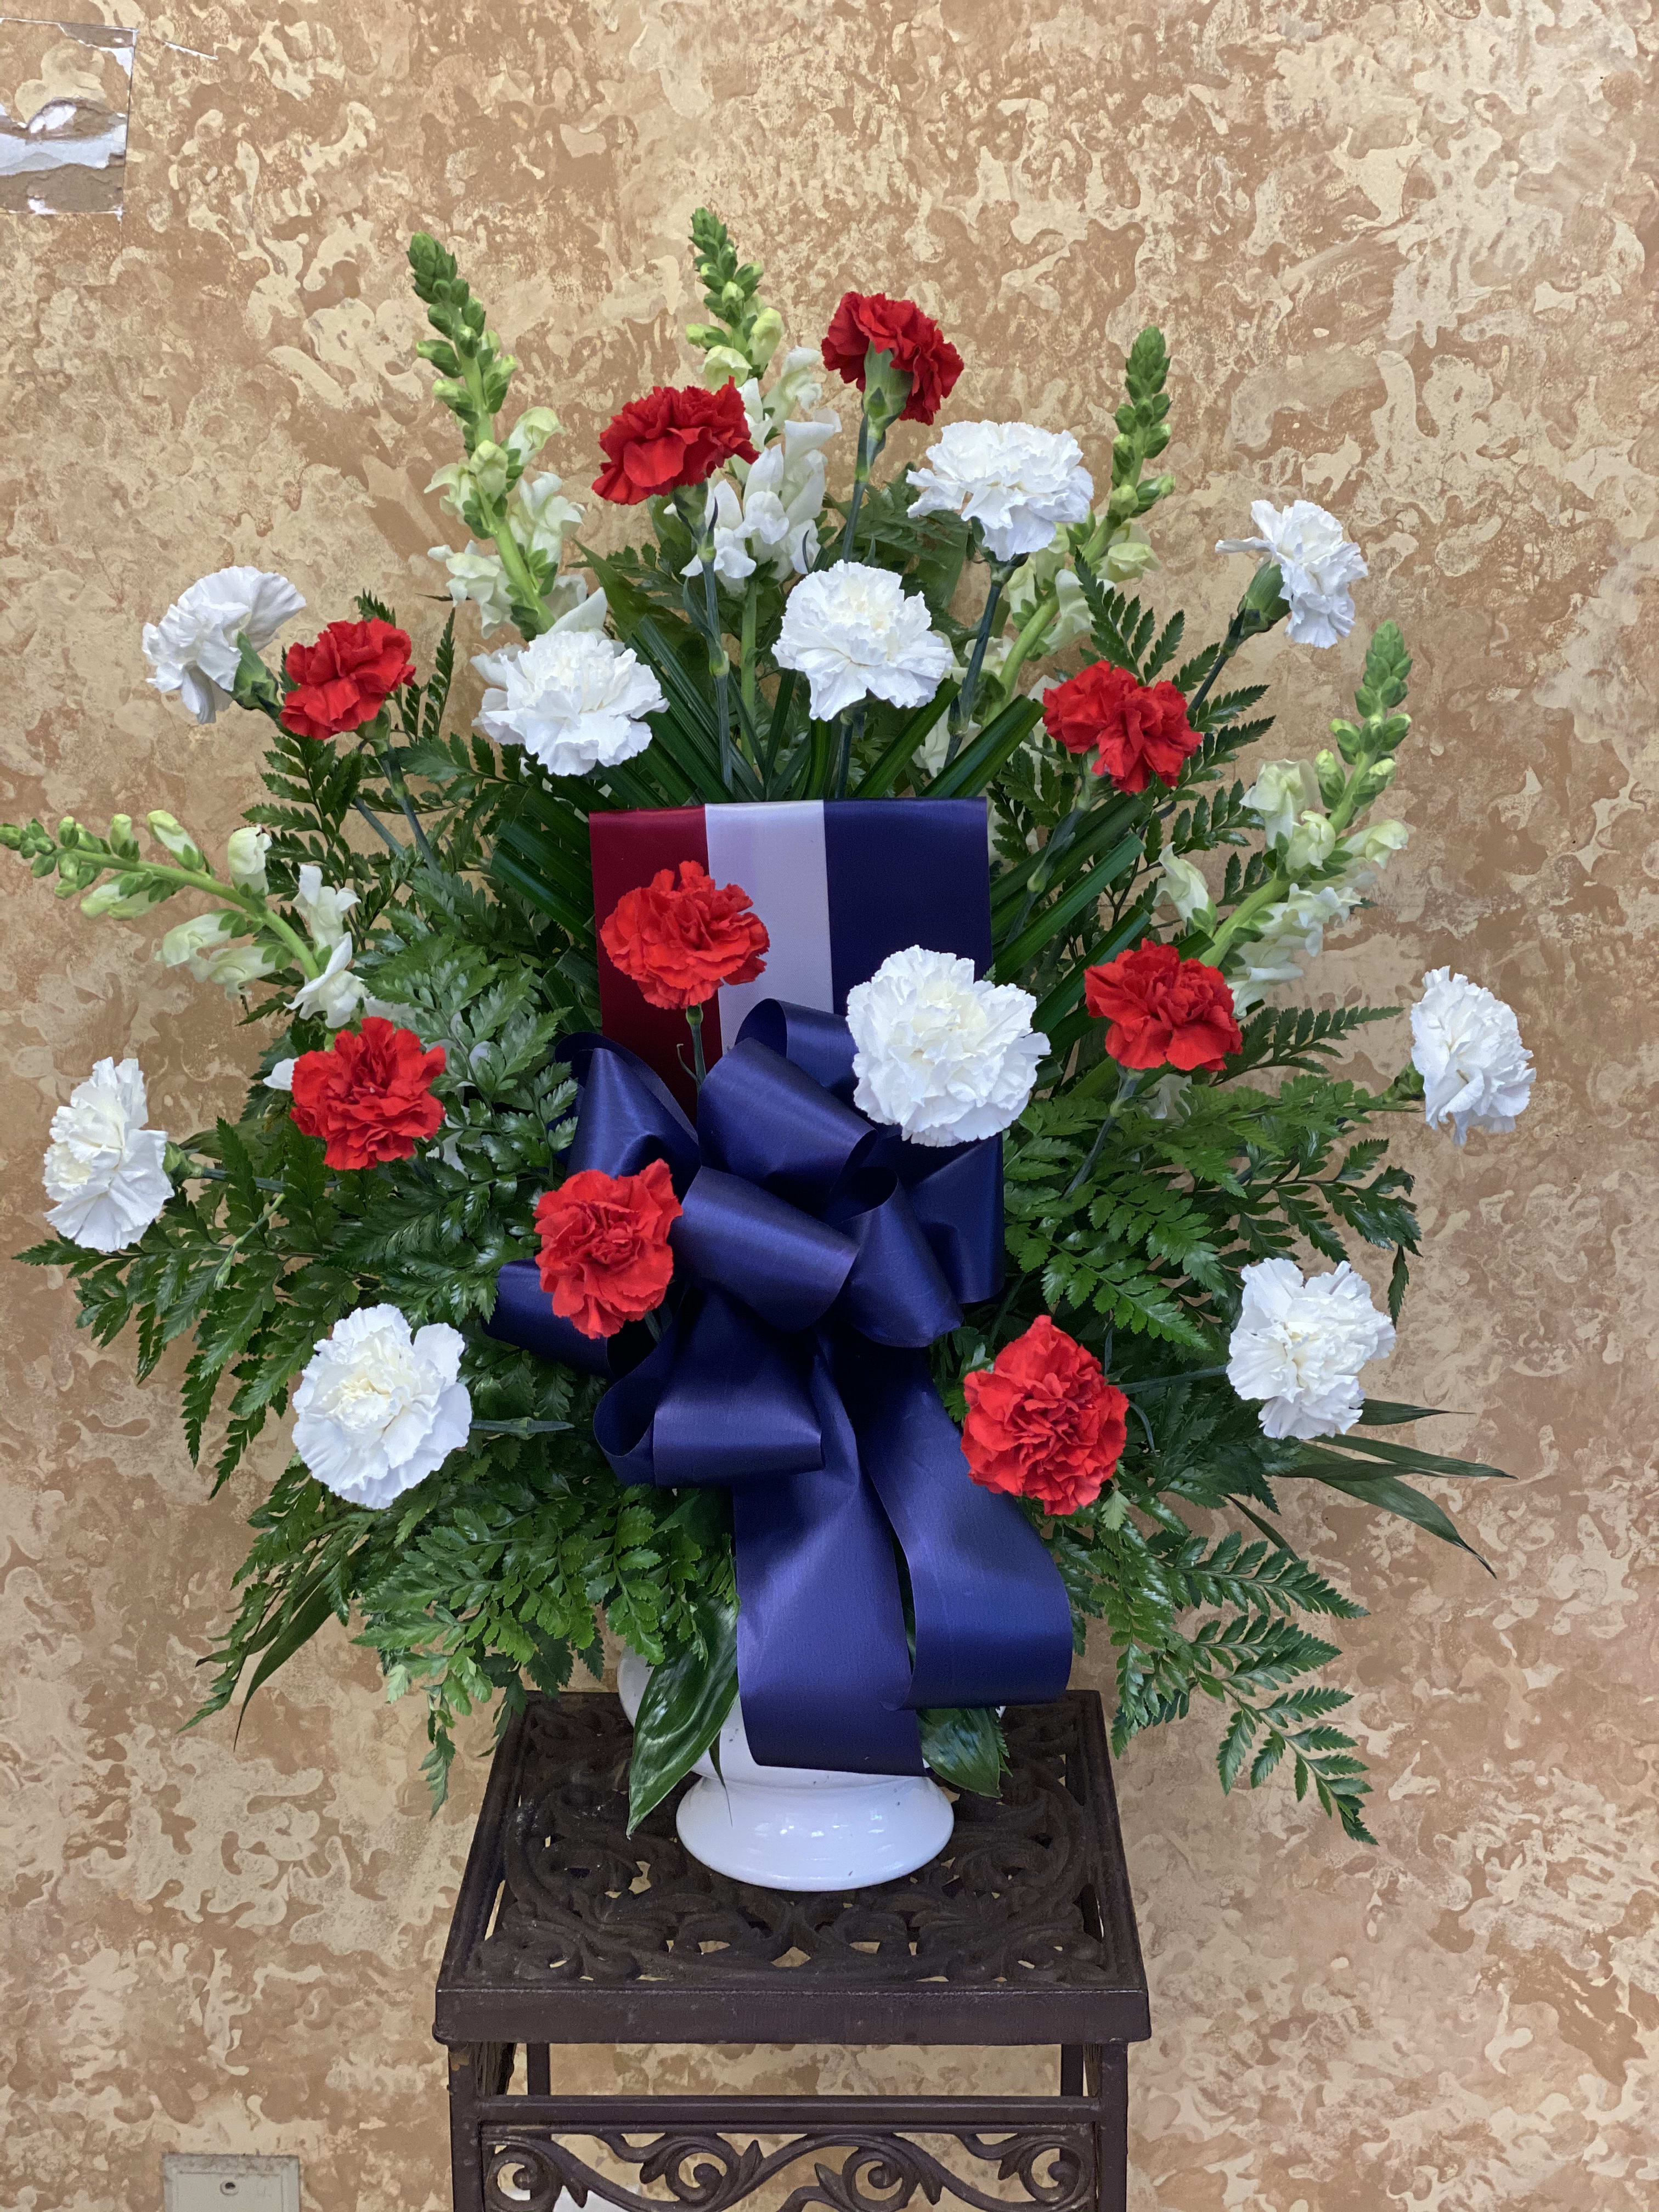 The Red White and Blue - Pay your respects with this Patriotic Tribute of Red, White &amp; Blue.